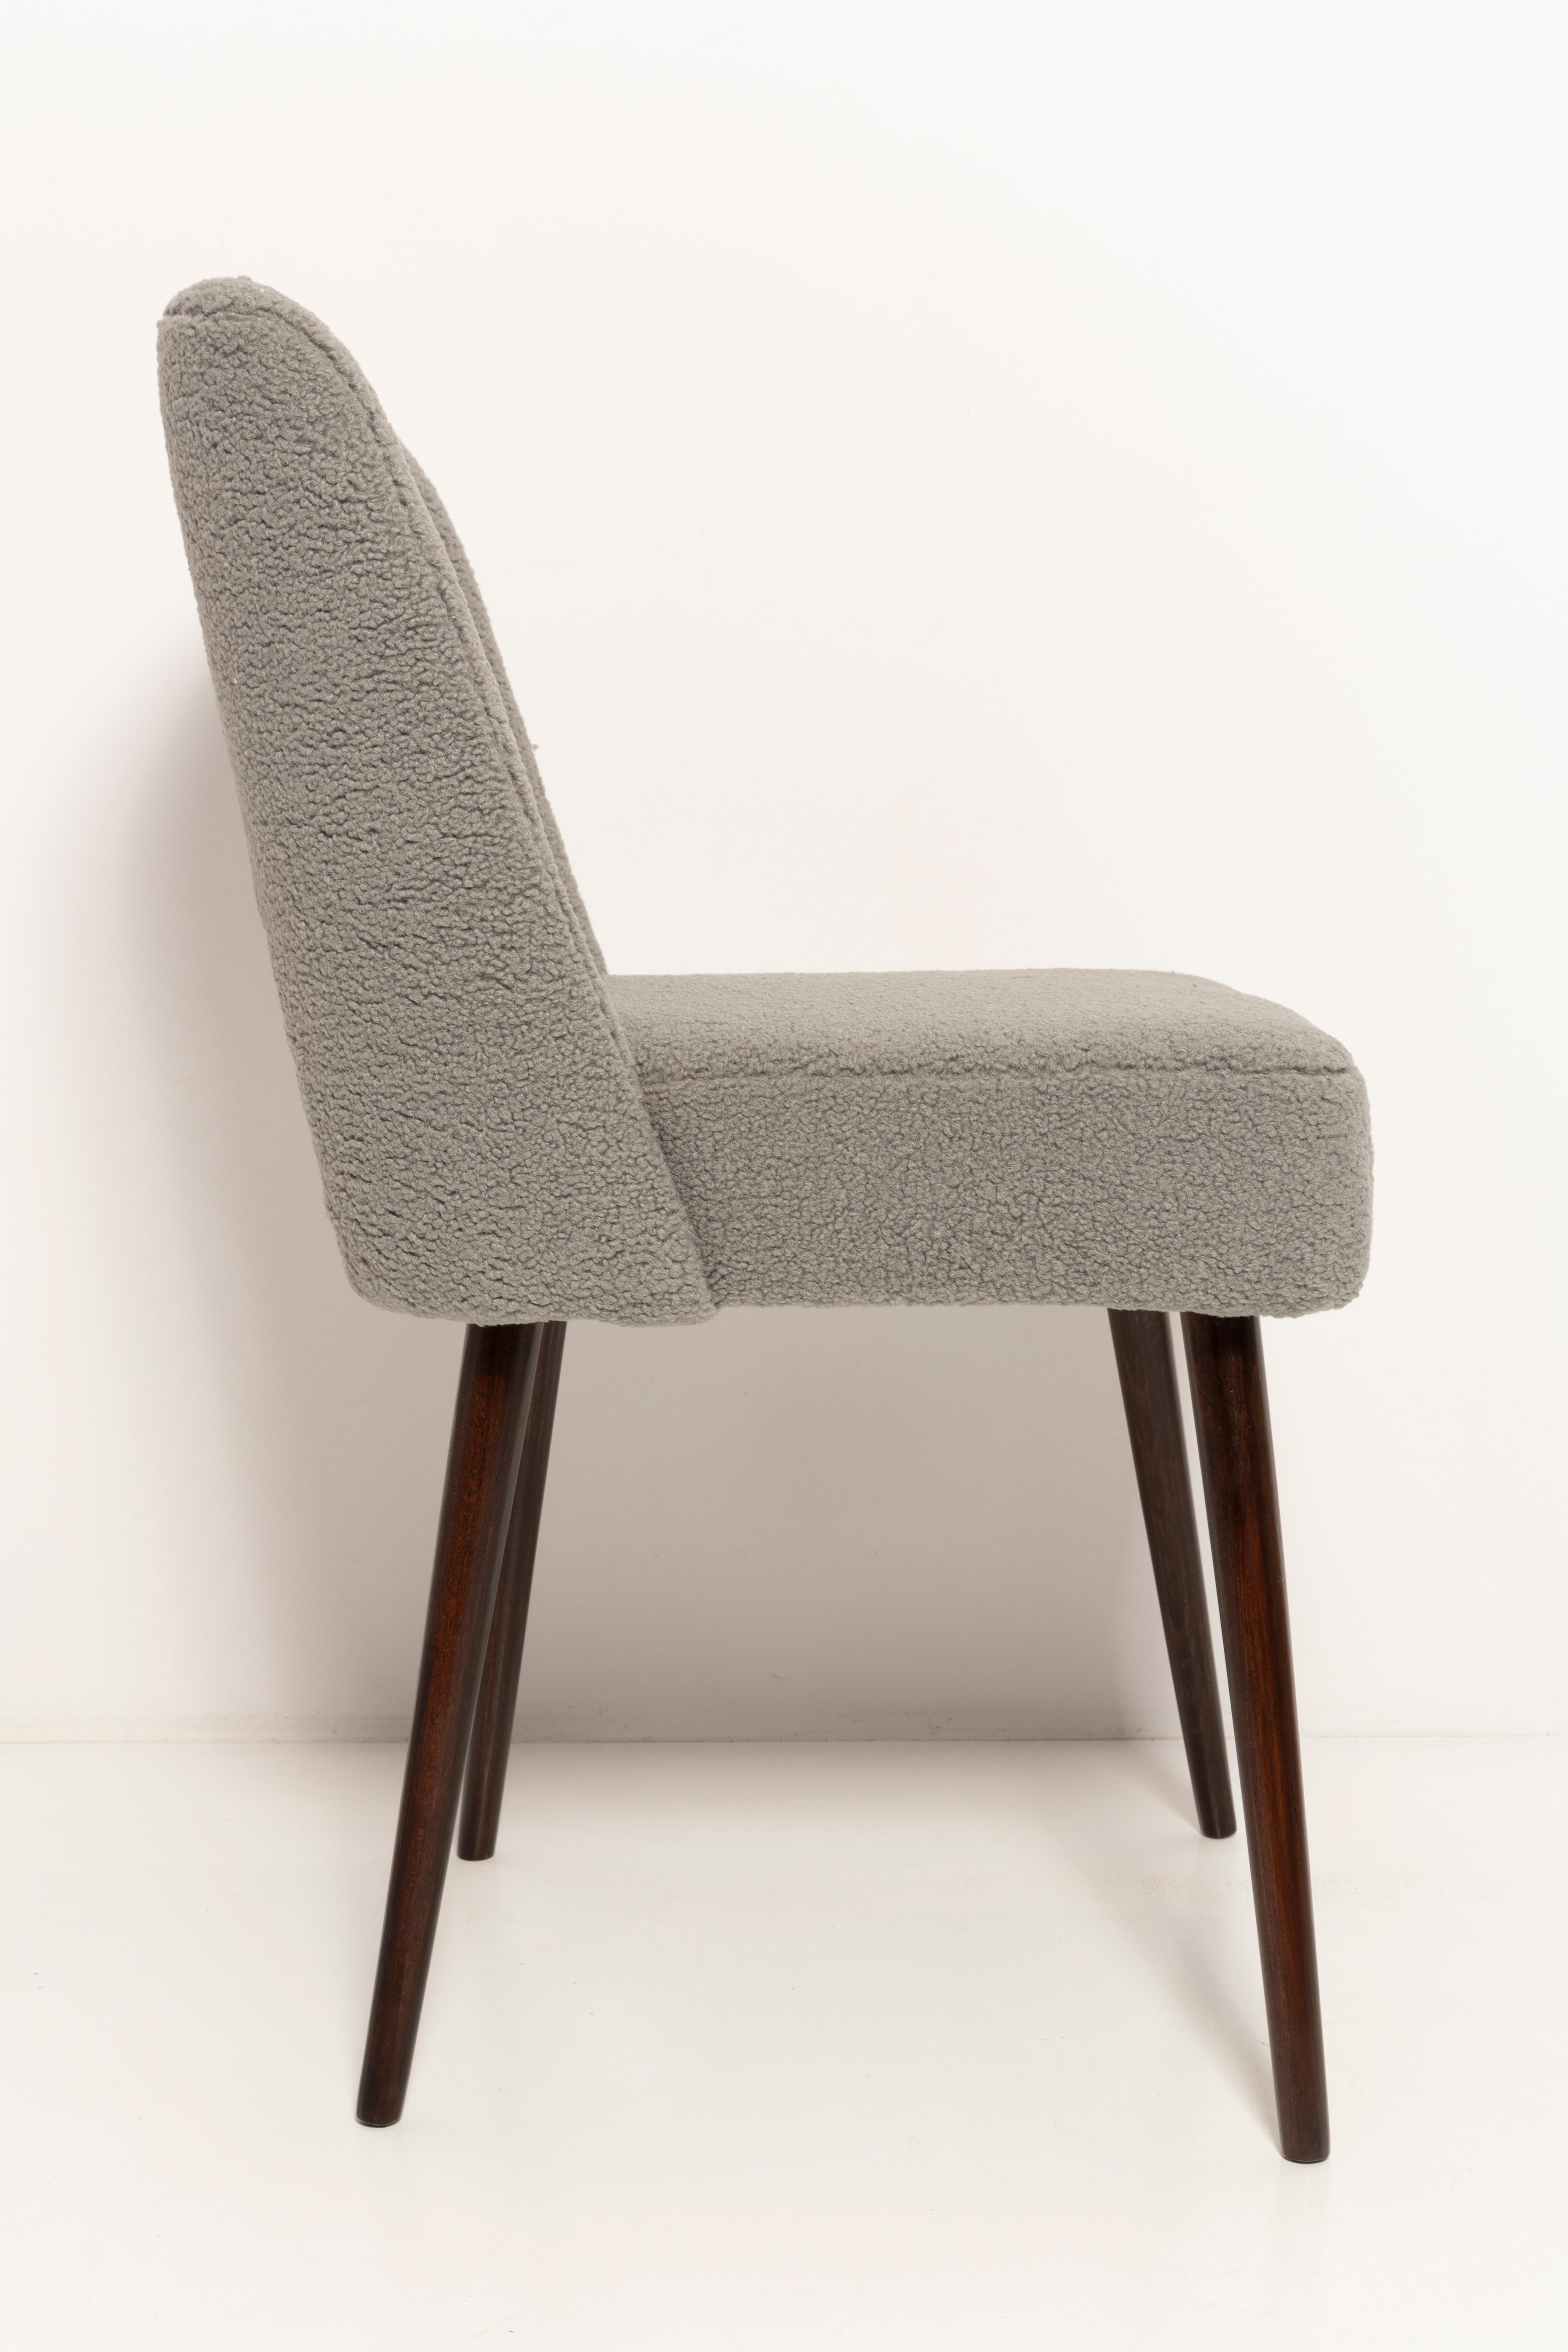 Hand-Crafted Gray Boucle 'Shell' Chair, Europe, 1960s For Sale